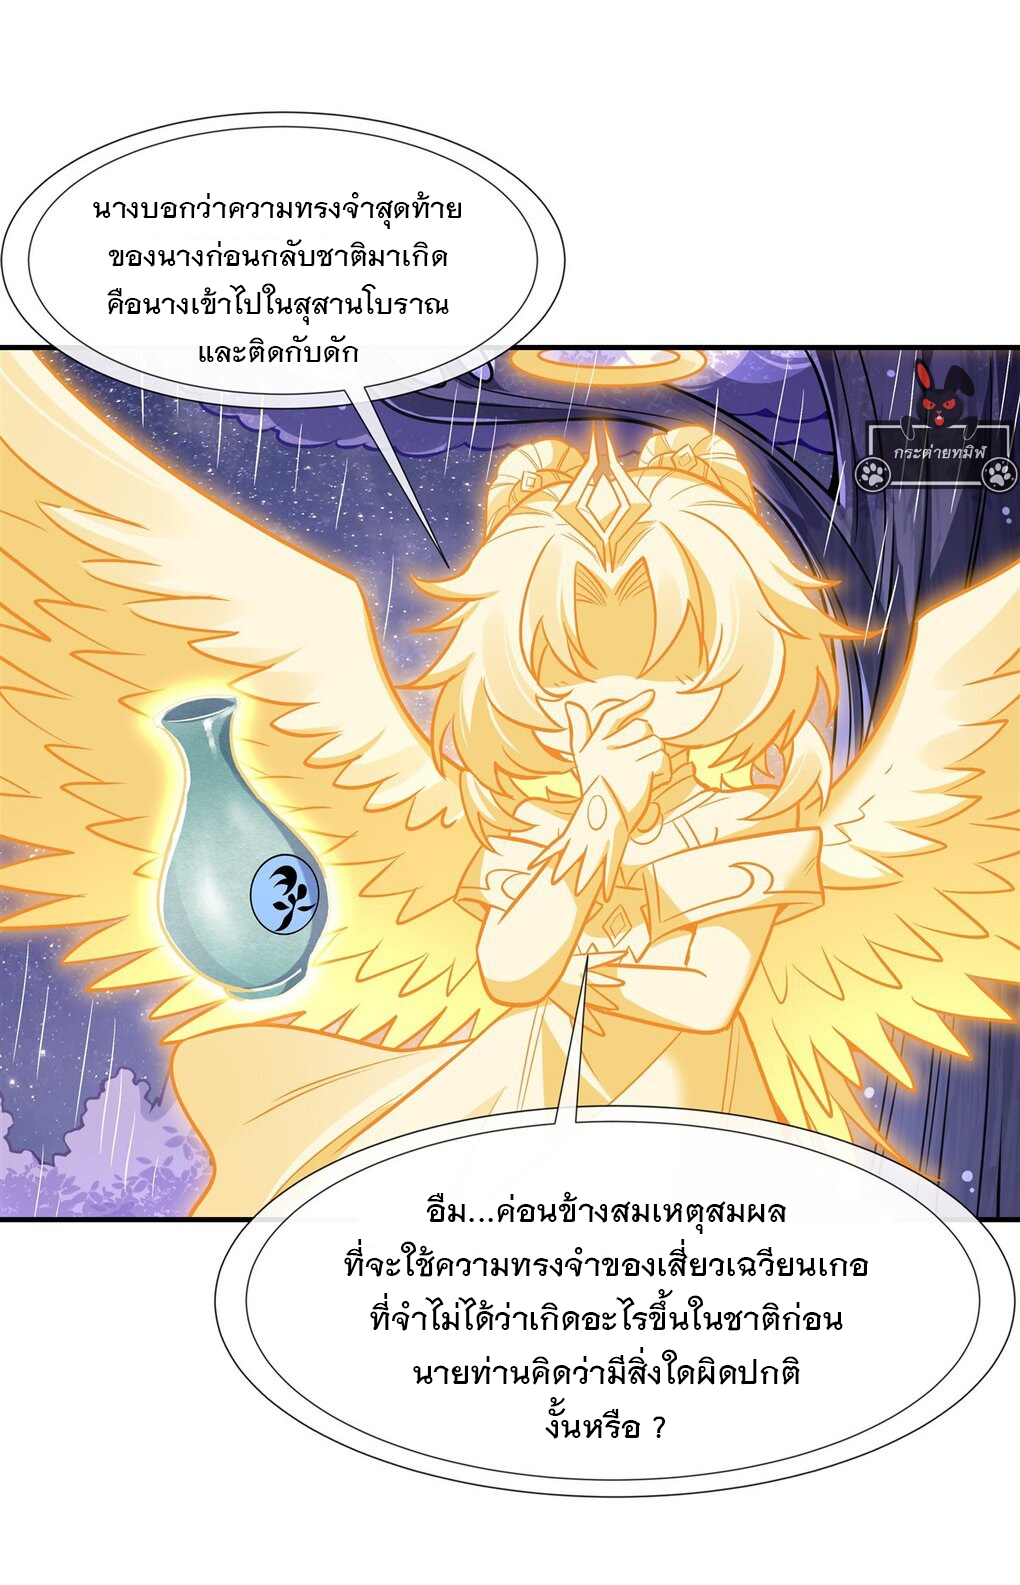 My Female Apprentices Are All Big Shots From the Future Ã Â¸â€¢Ã Â¸Â­Ã Â¸â„¢Ã Â¸â€”Ã Â¸ÂµÃ Â¹Ë† 95 (7)